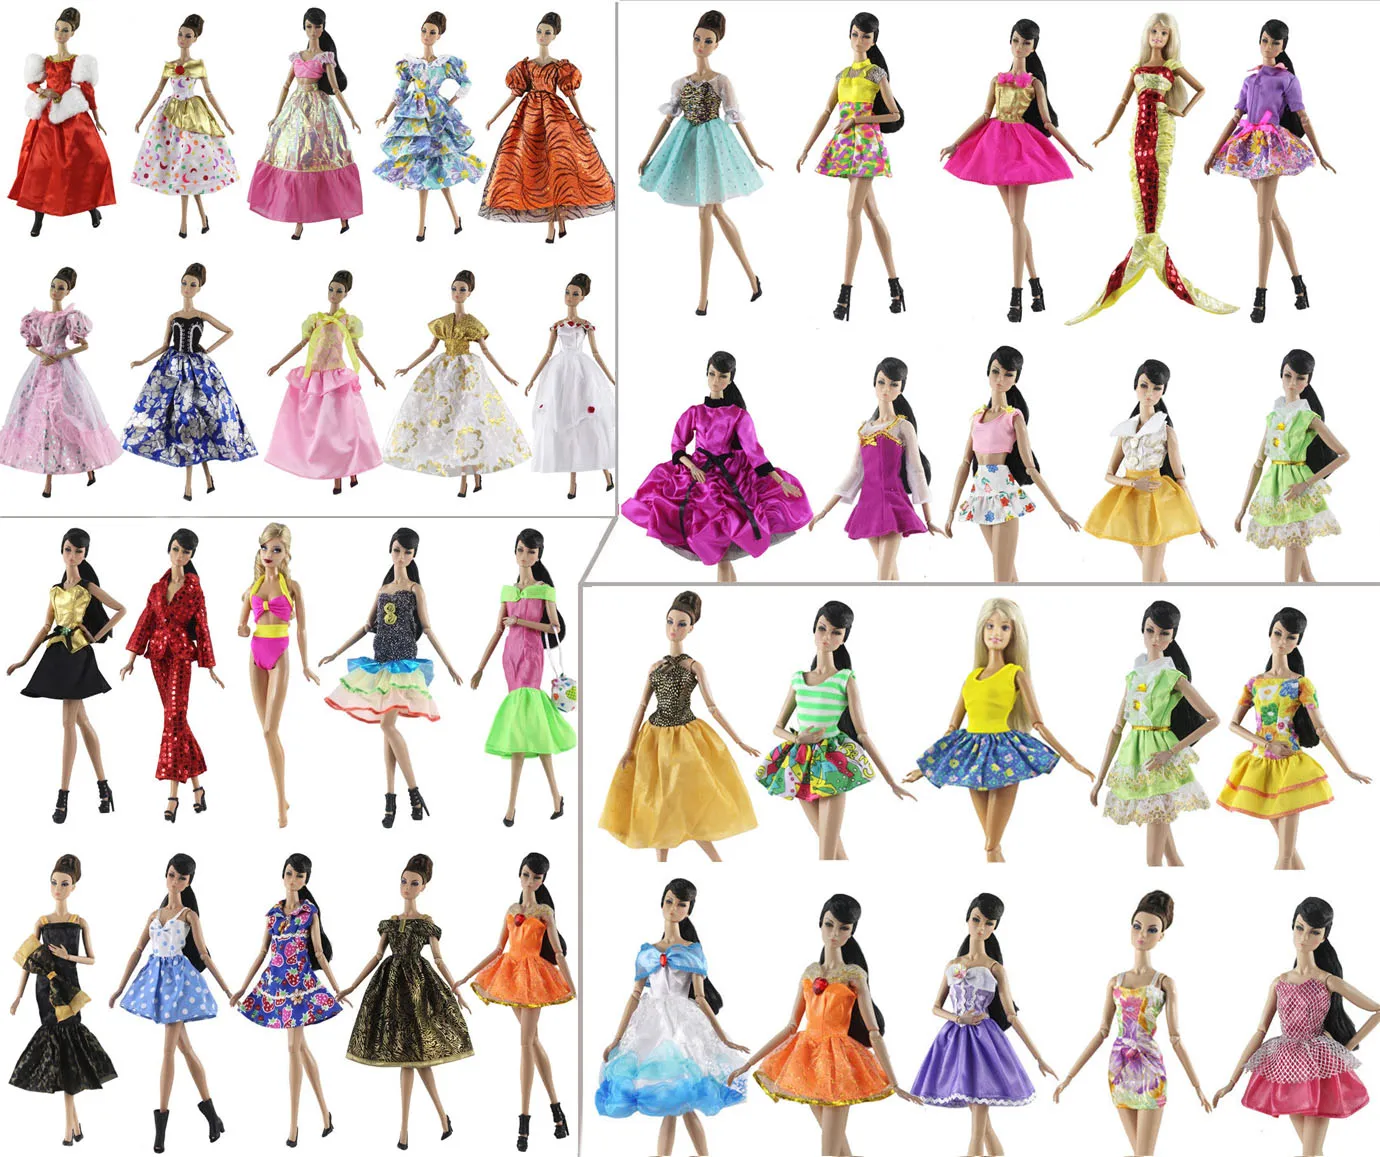 Lot 10 Sets BABI Doll Clothes Many for Choice 1:6 Scale Dress Outfit for 11.5 inch 30cm Doll Clothes Gifts for girls